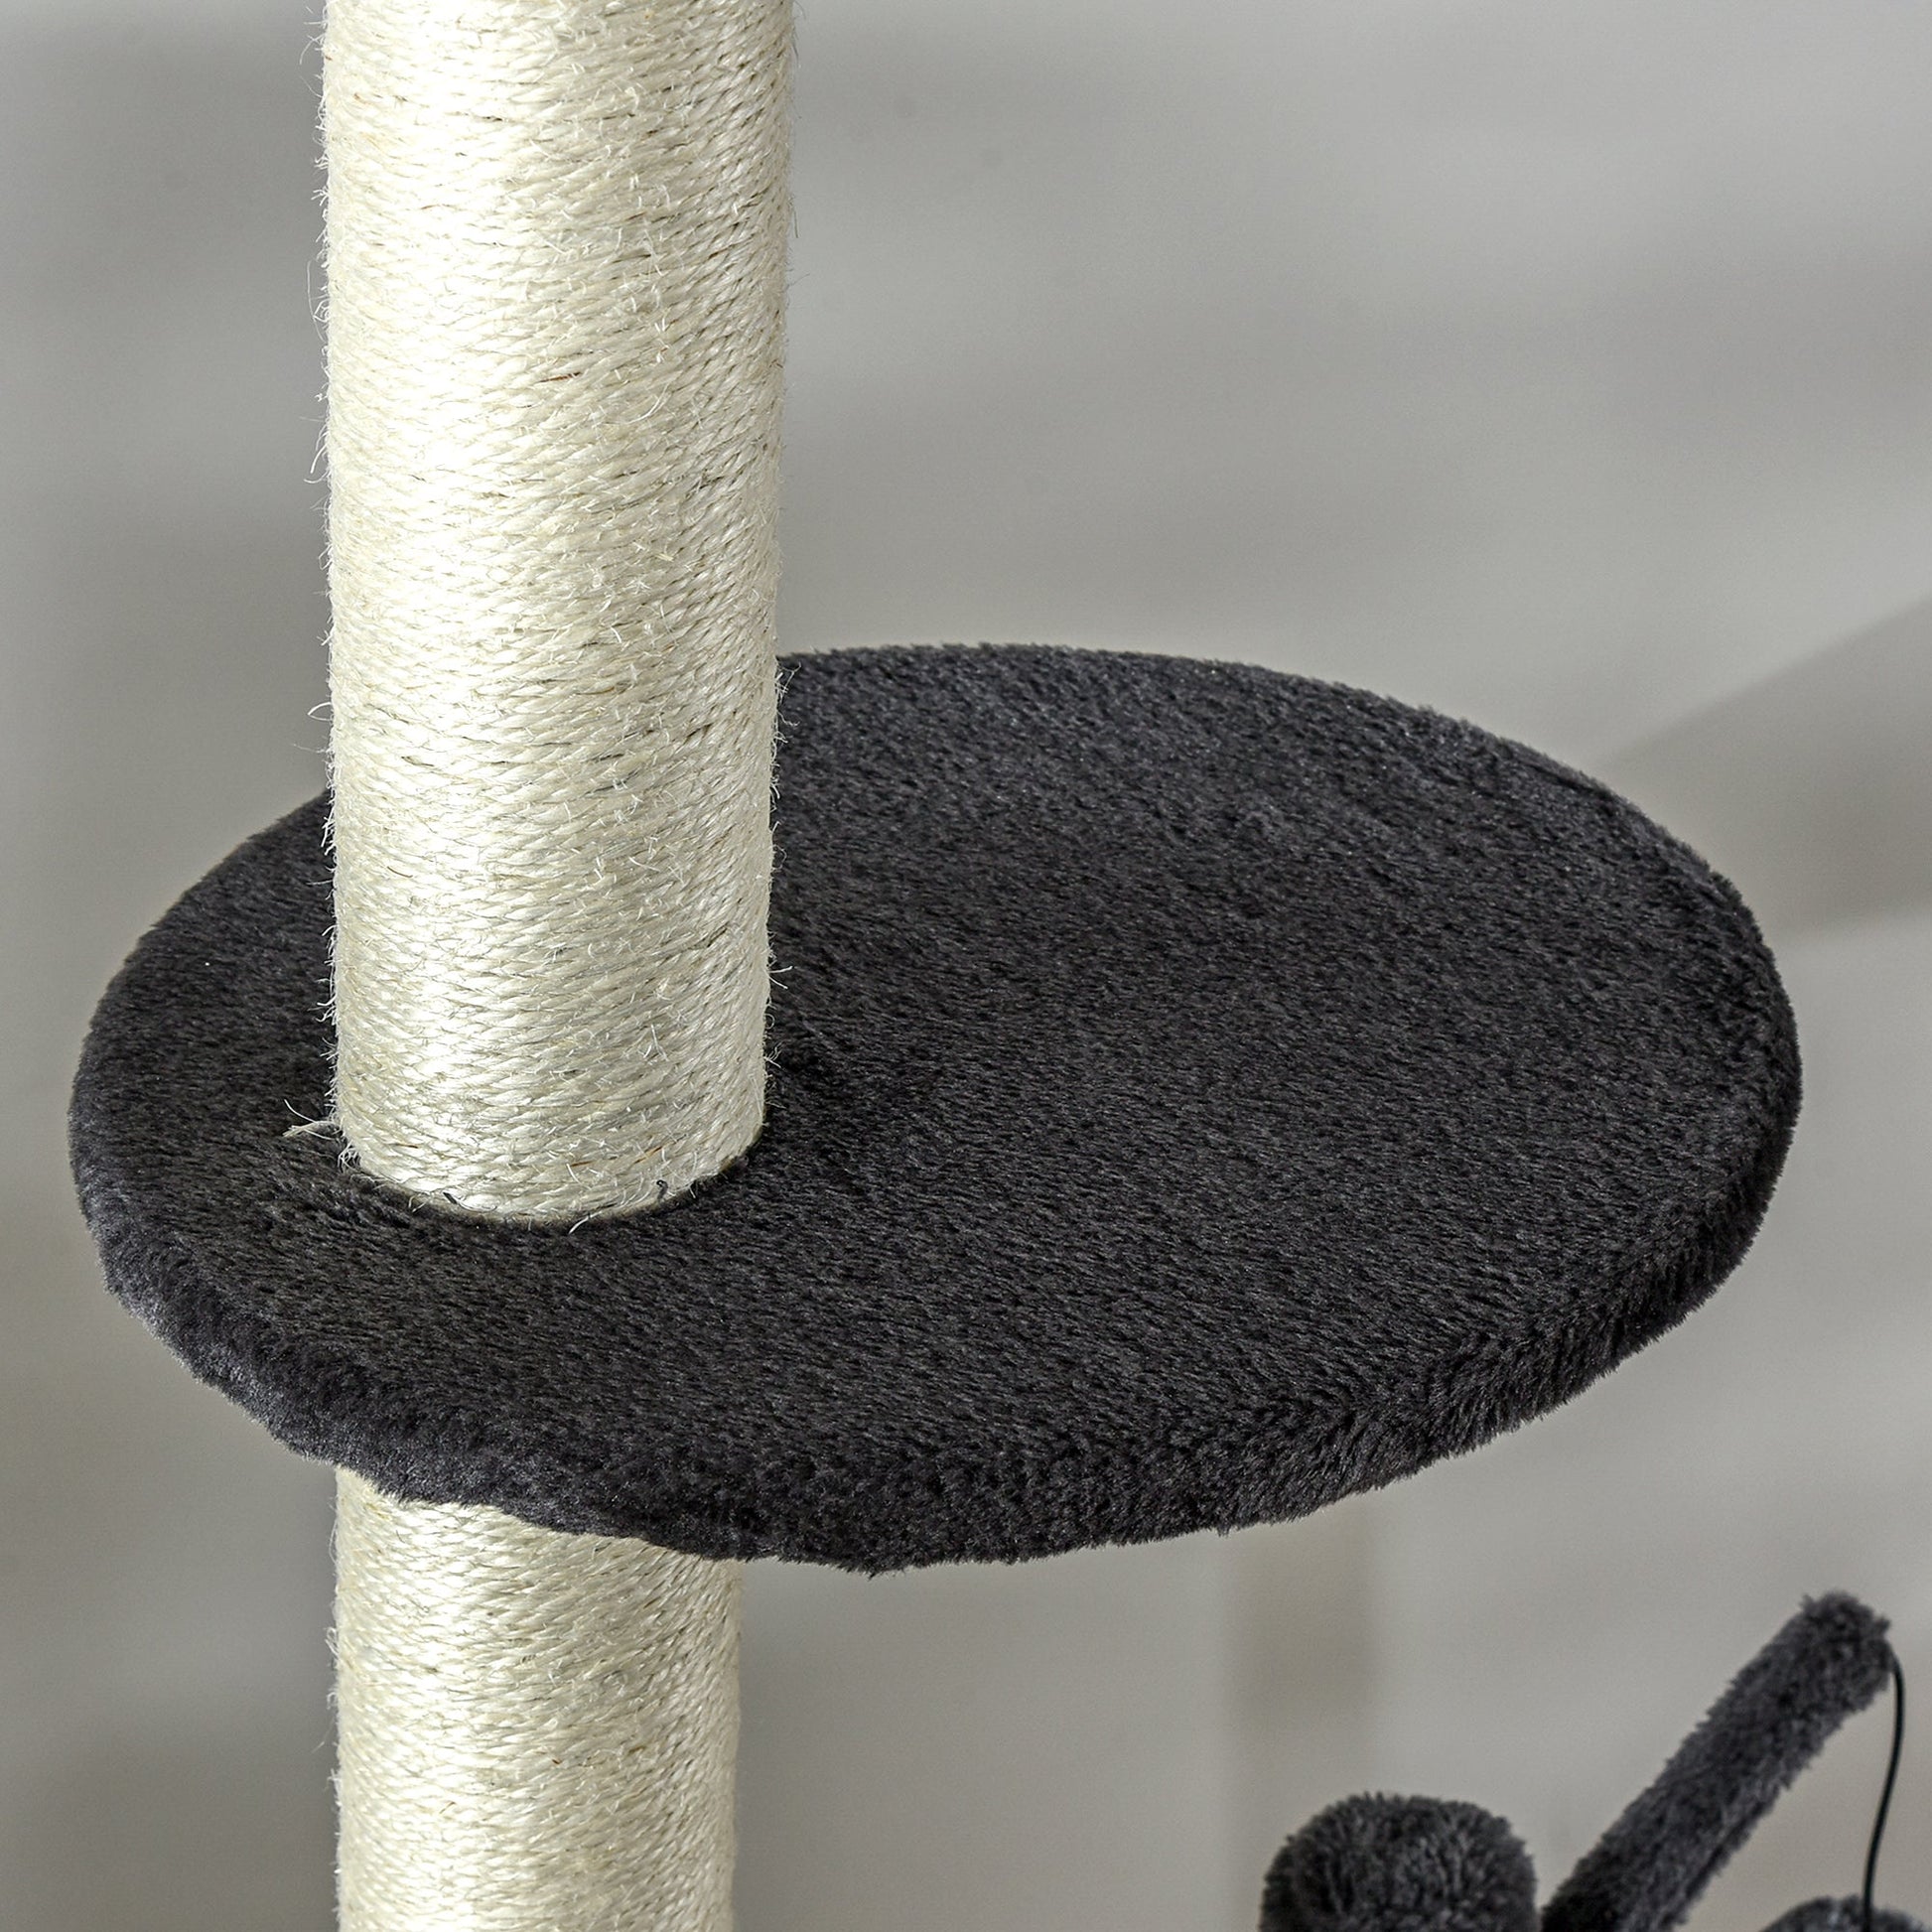 110" Huge Cat Tree Kitty Activity Center Floor-to-Ceiling Cat Climbing Toy with Scratching Post Board Hammock Hanging Ball Rest Pet Furniture Dark Grey at Gallery Canada